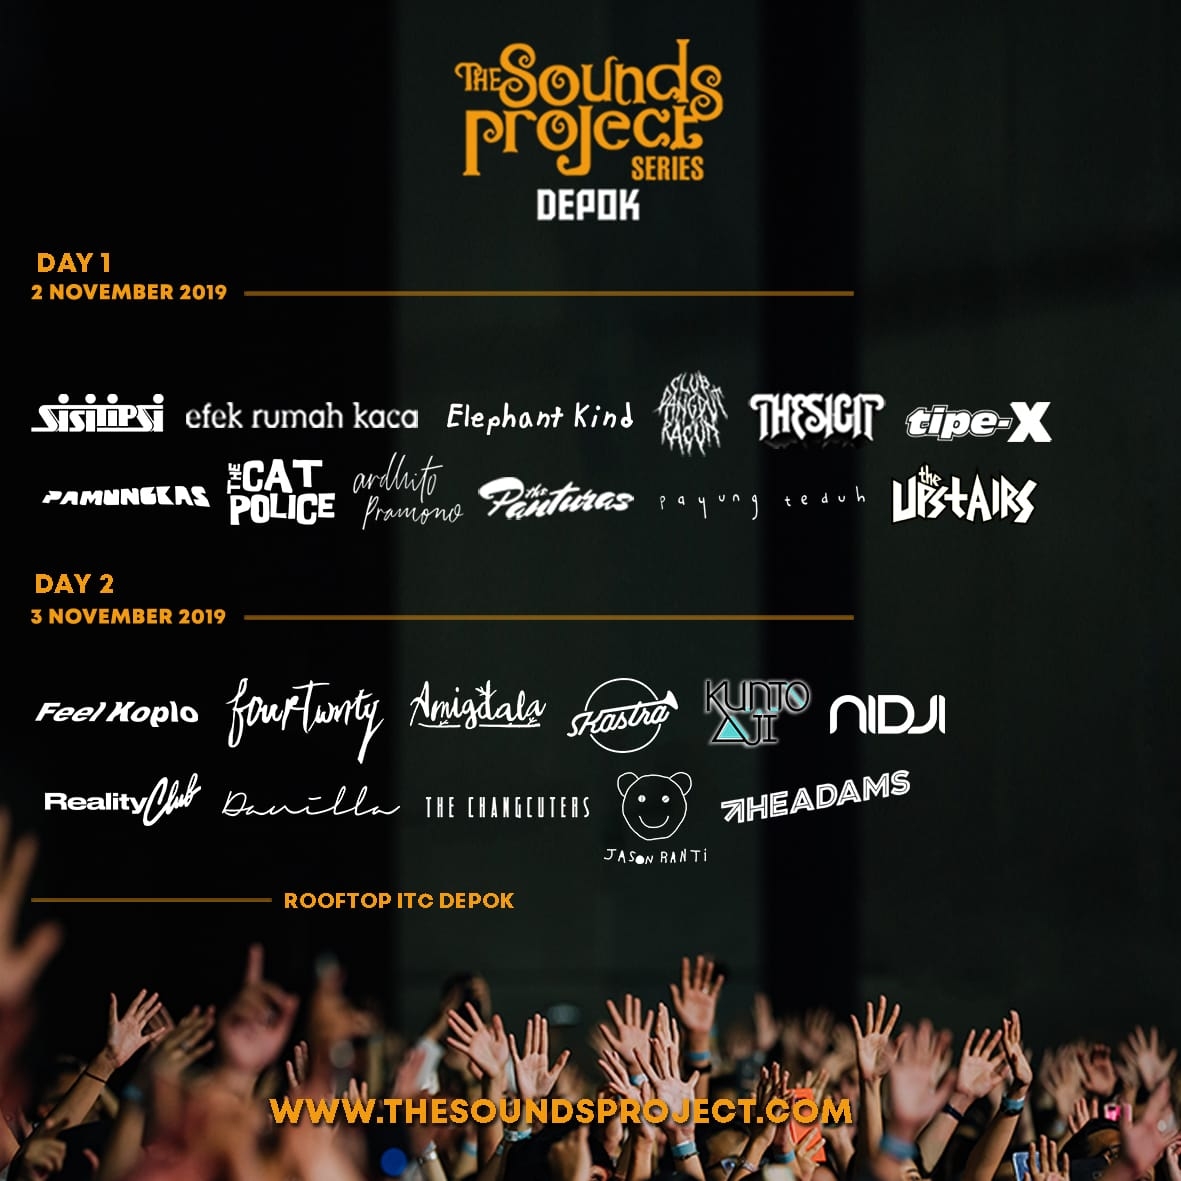 The Sounds Project Series Depok